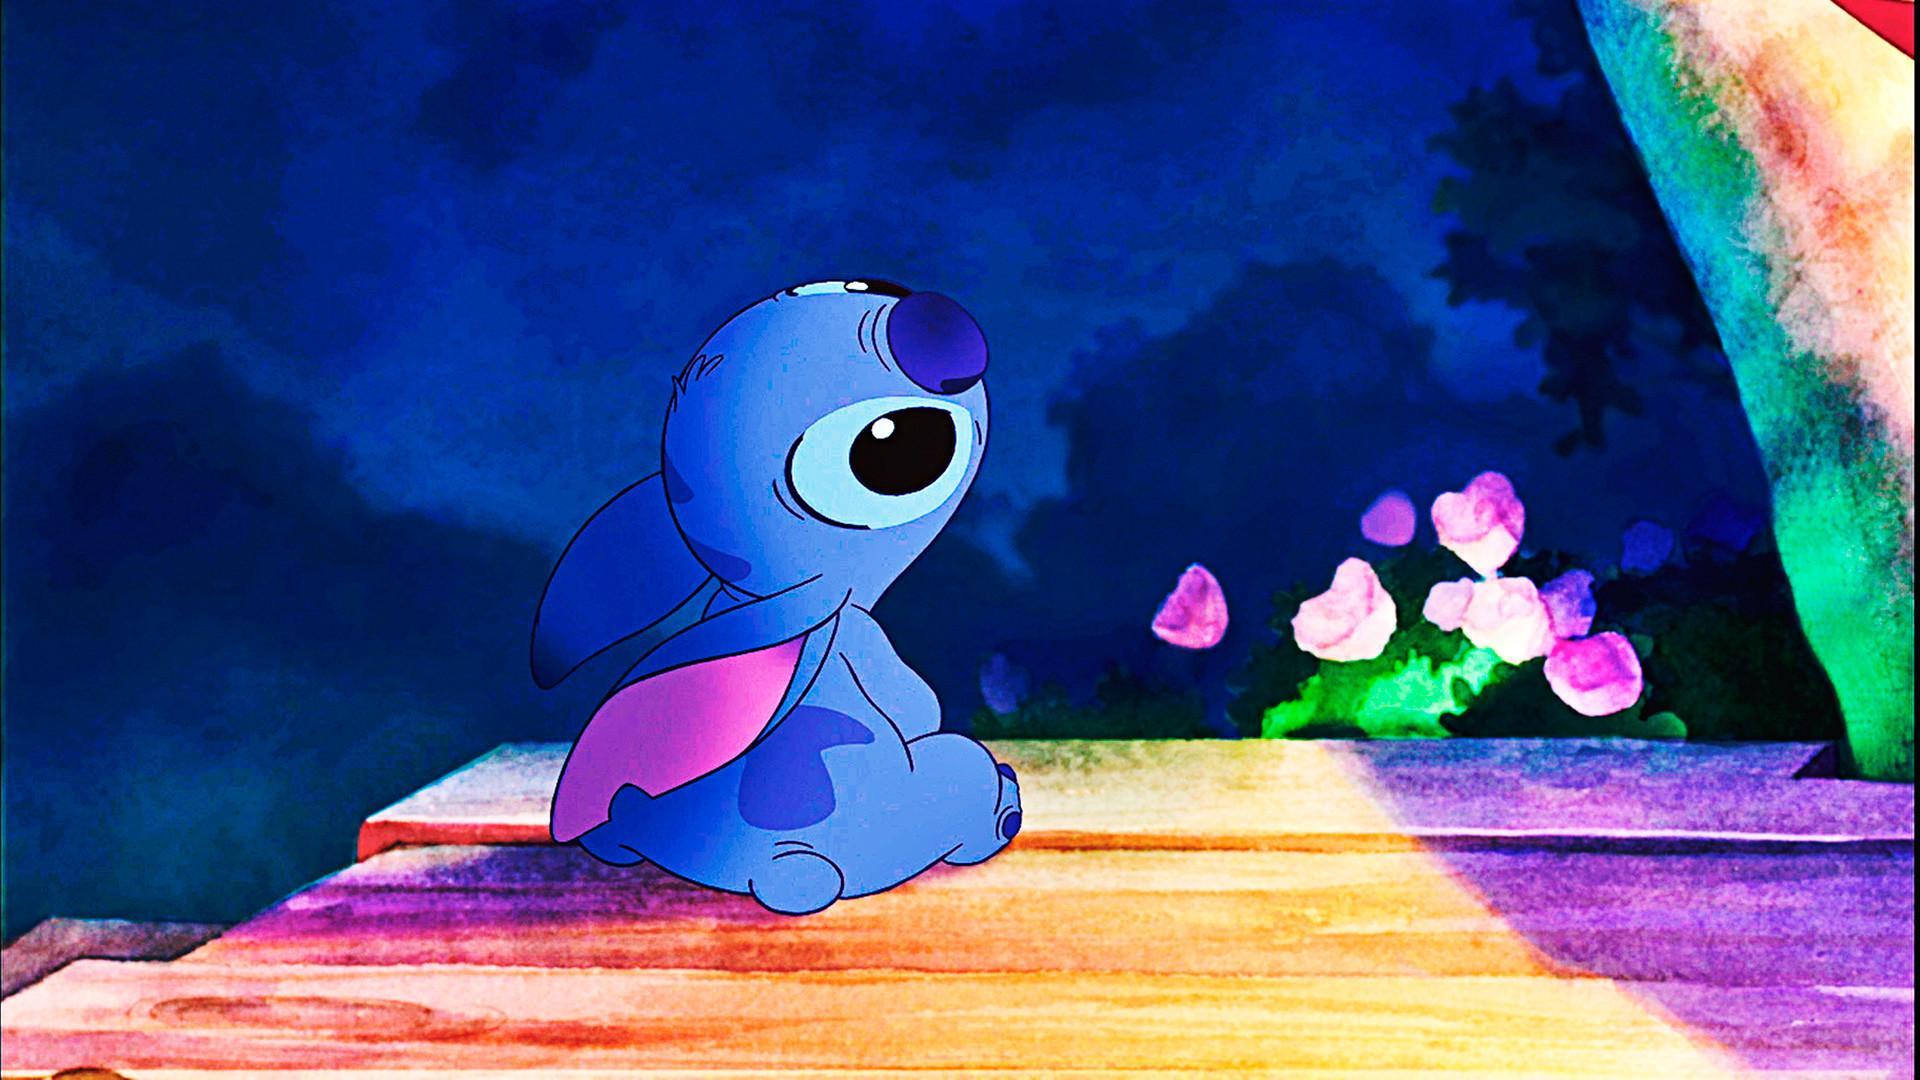 Cute Lilo And Stitch Computer Wallpapers - Top Free Cute Lilo And